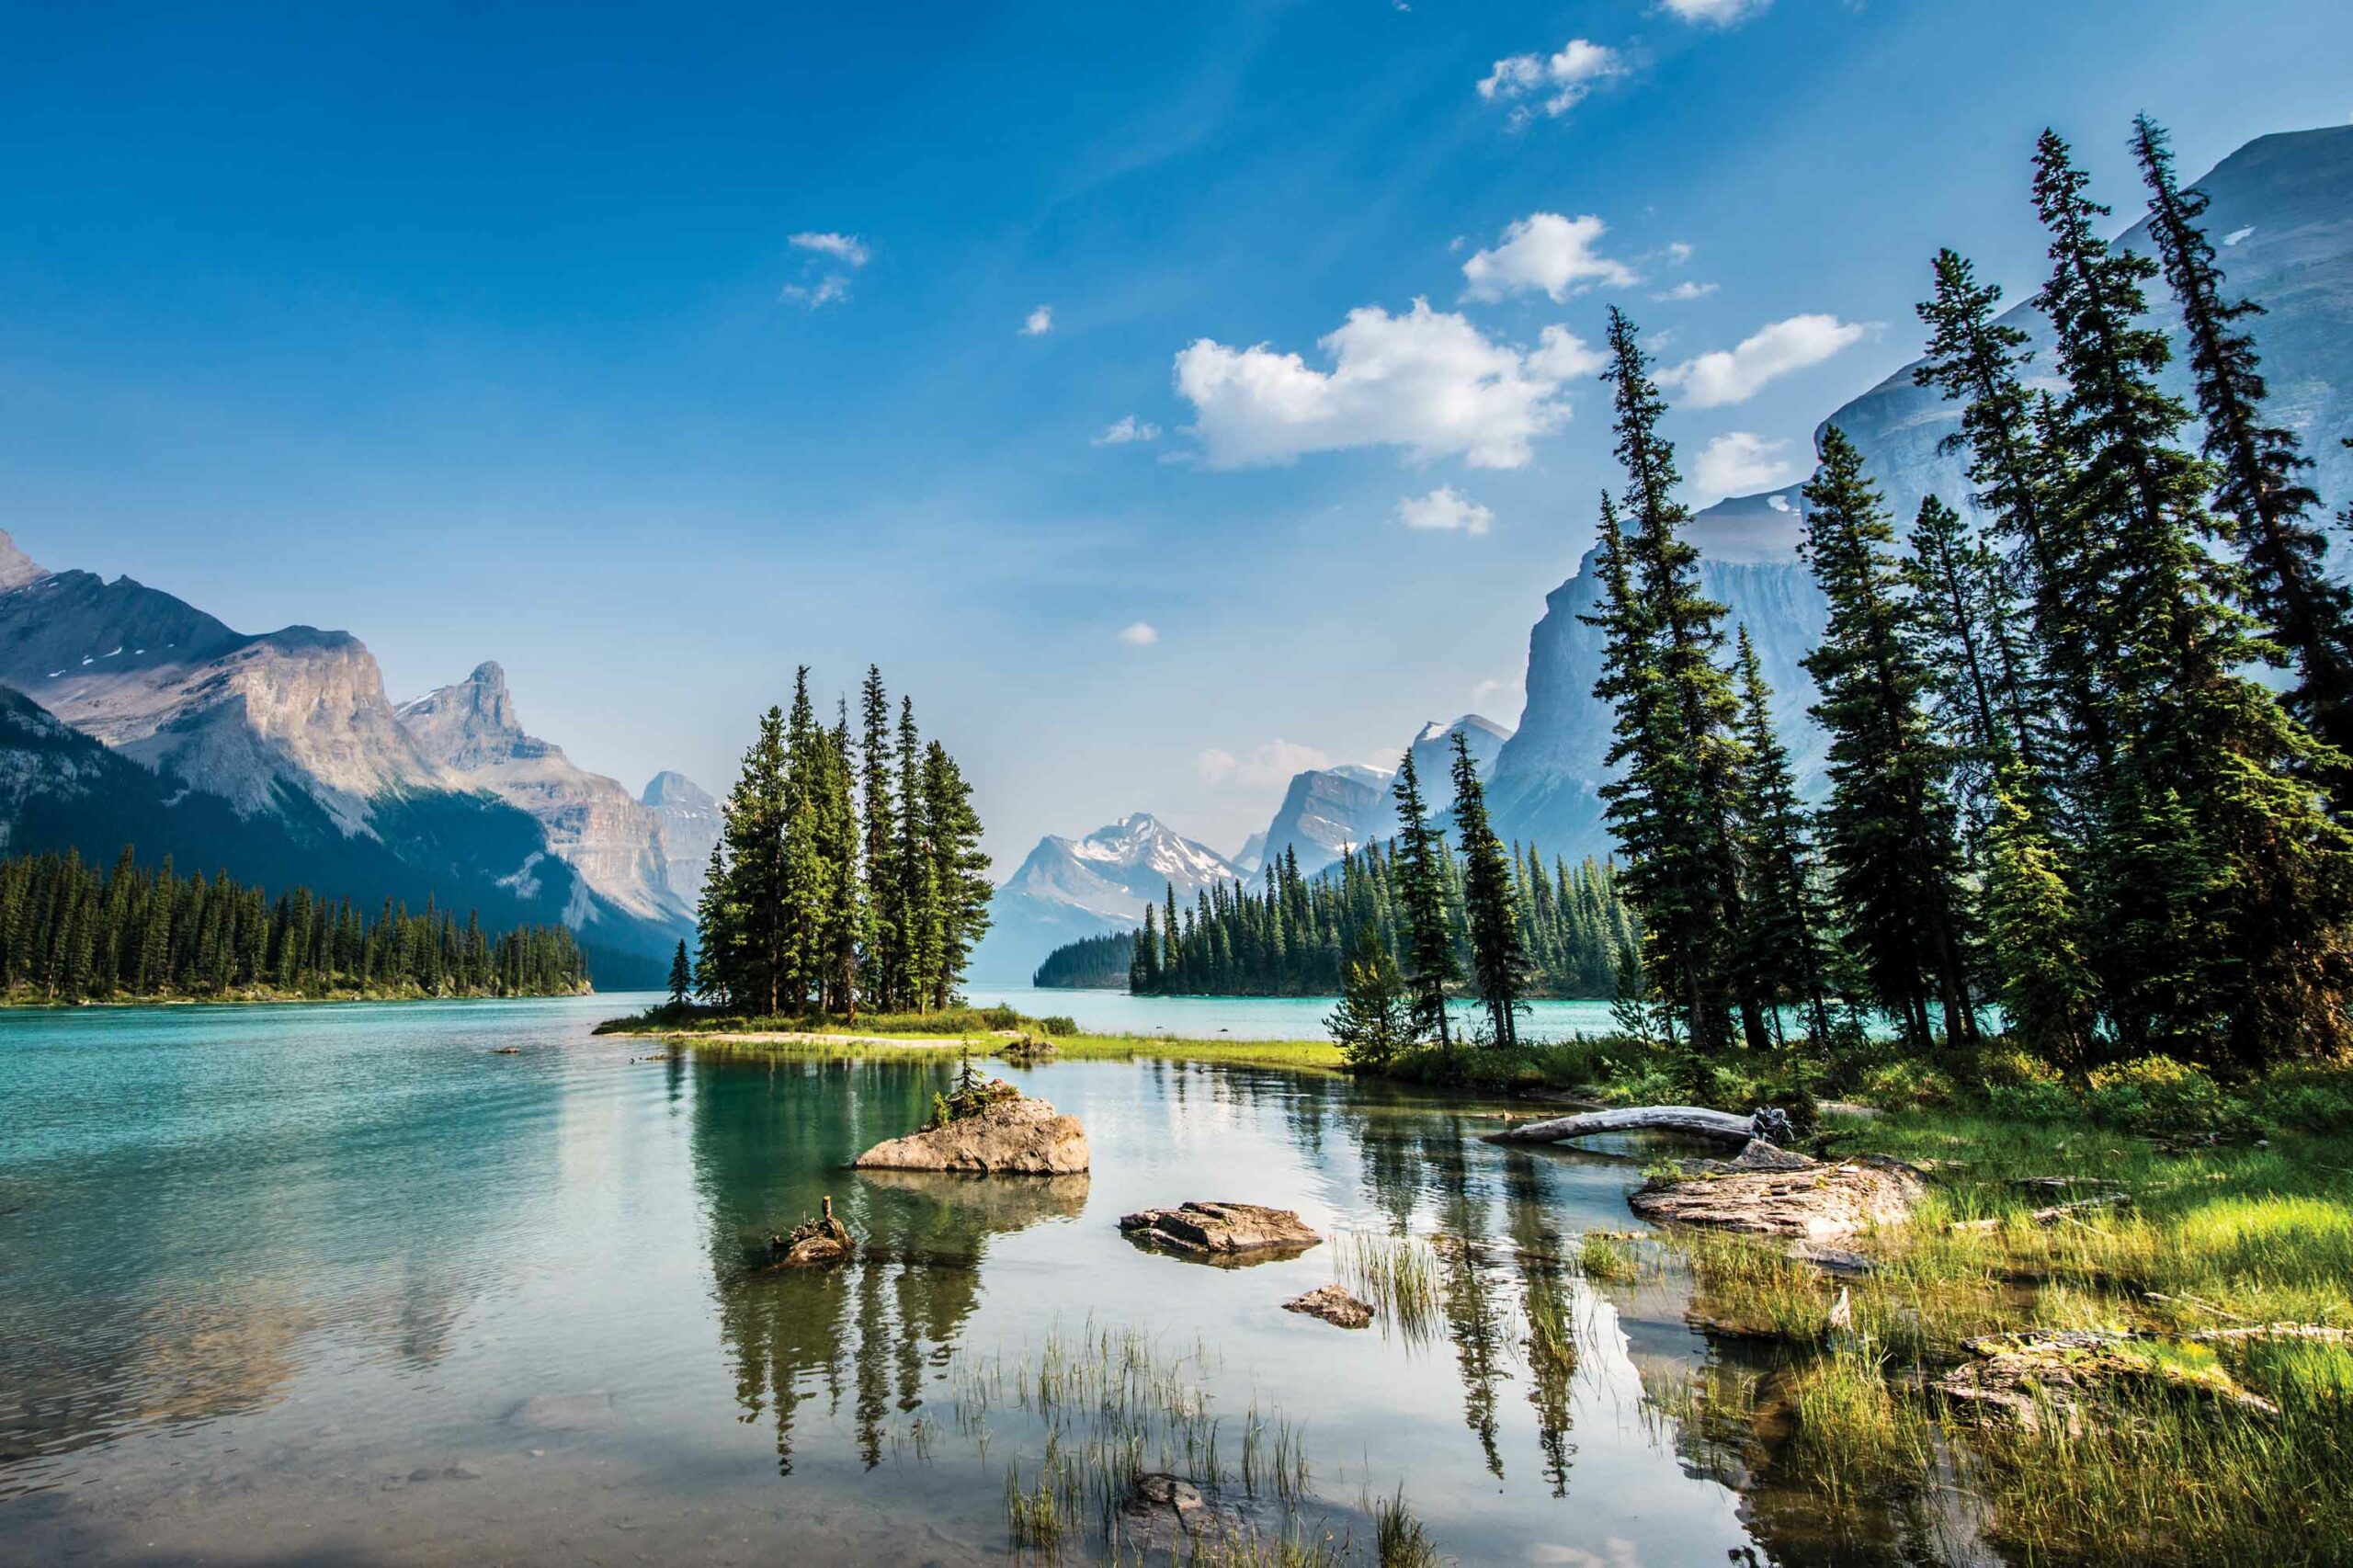 Spirit Island on Maligne Lake is one of the most photographed places in the Canadian Rockies